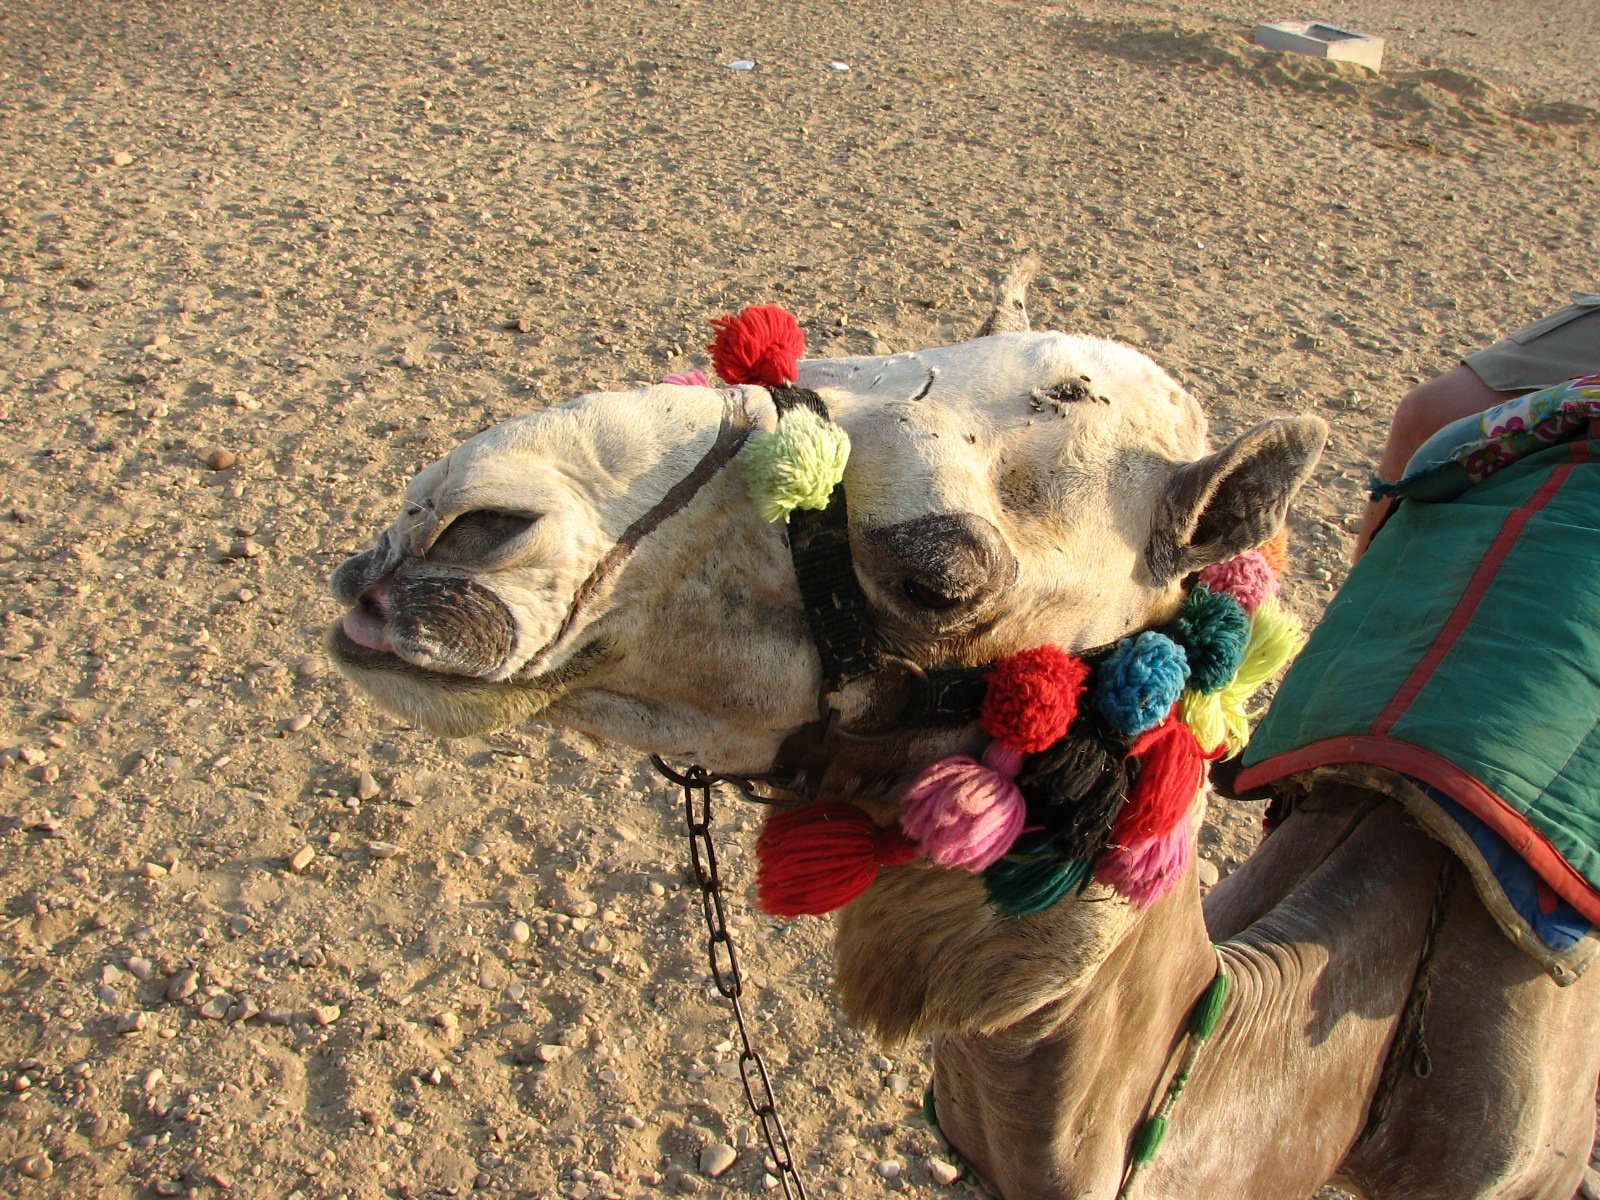 a camel with colorful decorations standing on dirt